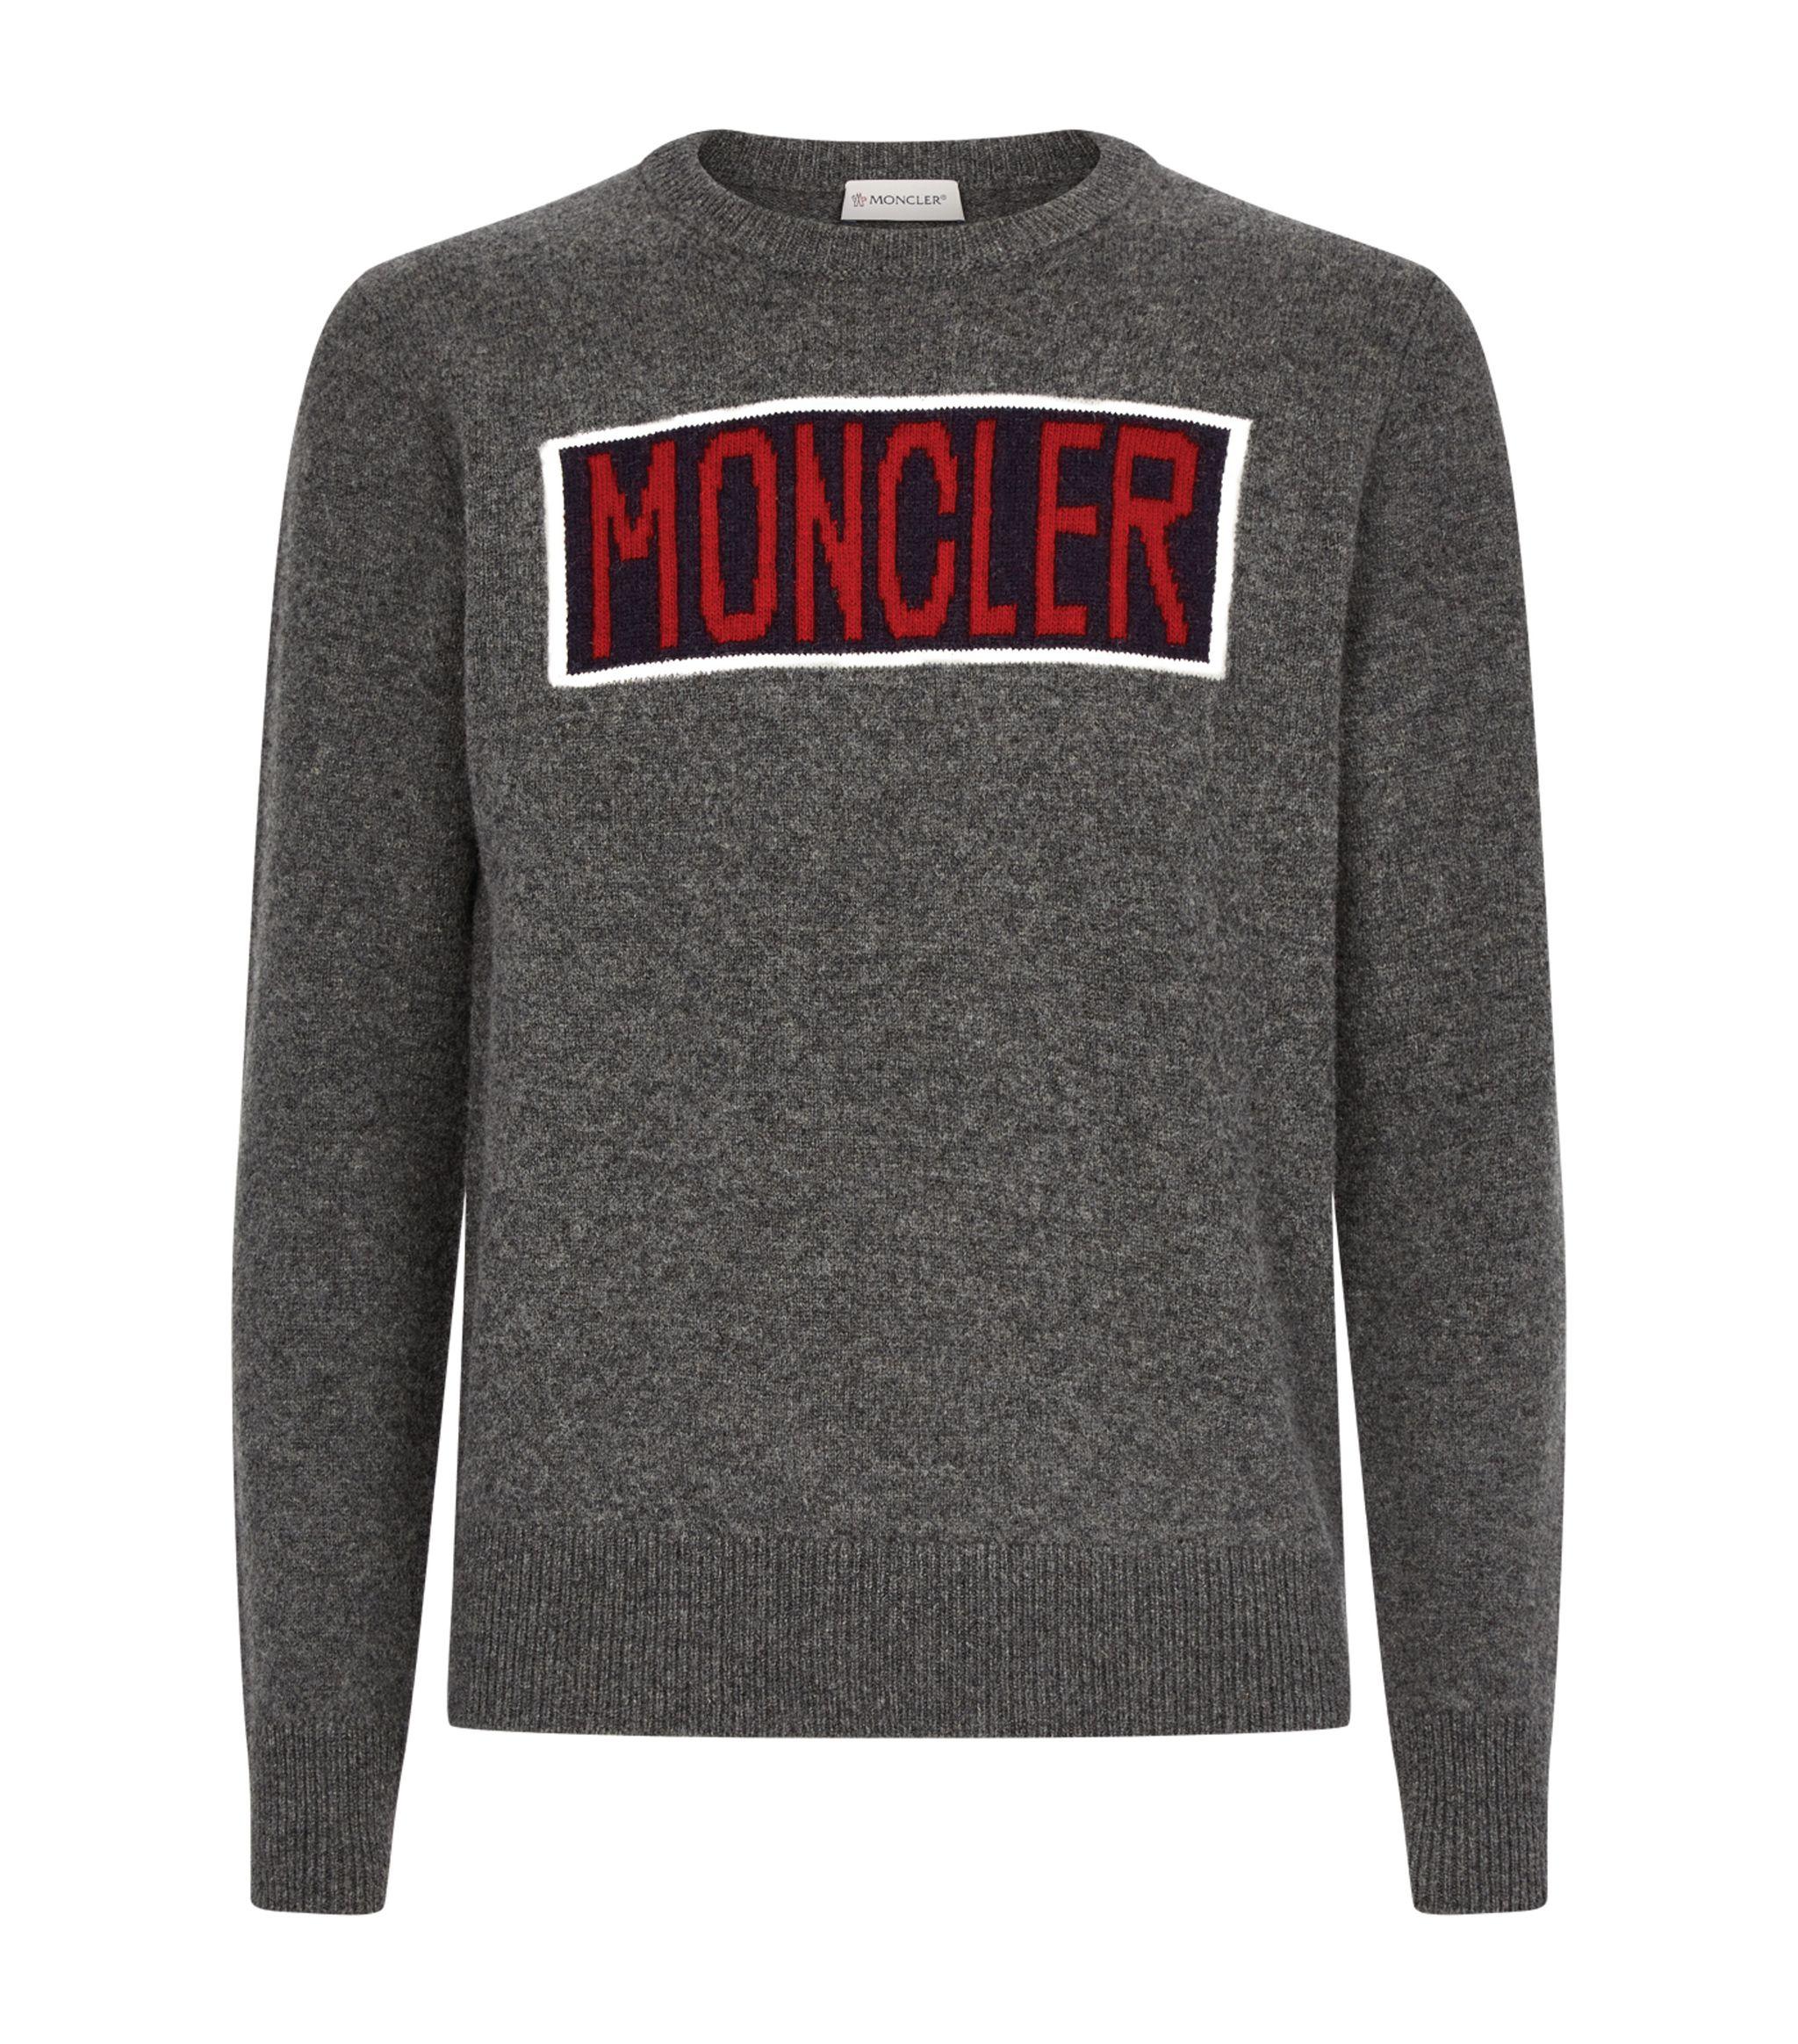 Moncler Wool Logo Sweater in Grey (Gray) for Men - Save 60% - Lyst